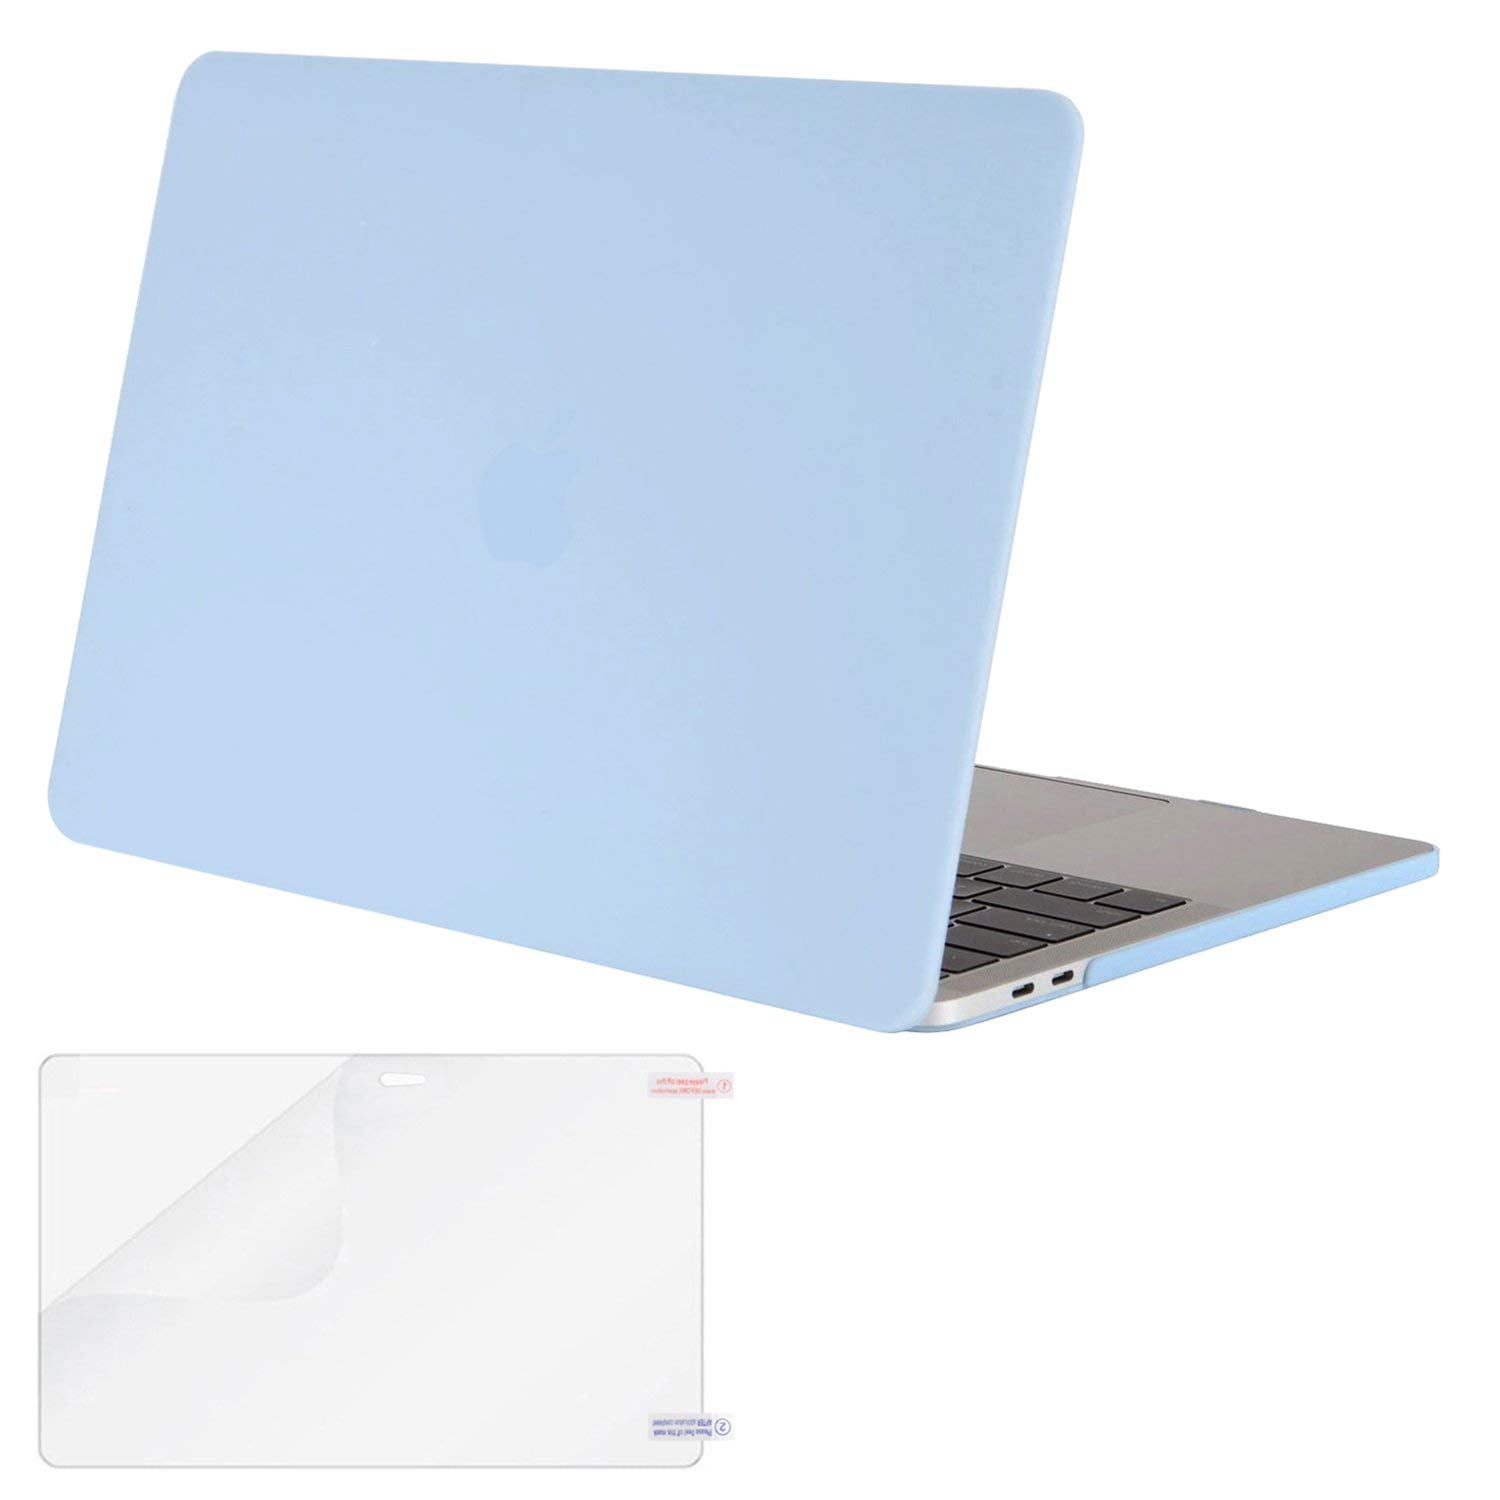 Plastic Hard Shell Cover & Screen Protector Compatible with MacBook Pro 15 inch with Touch Bar and Touch ID MOSISO MacBook Pro 15 inch Case 2019 2018 2017 2016 Release A1990 A1707 Airy Blue 